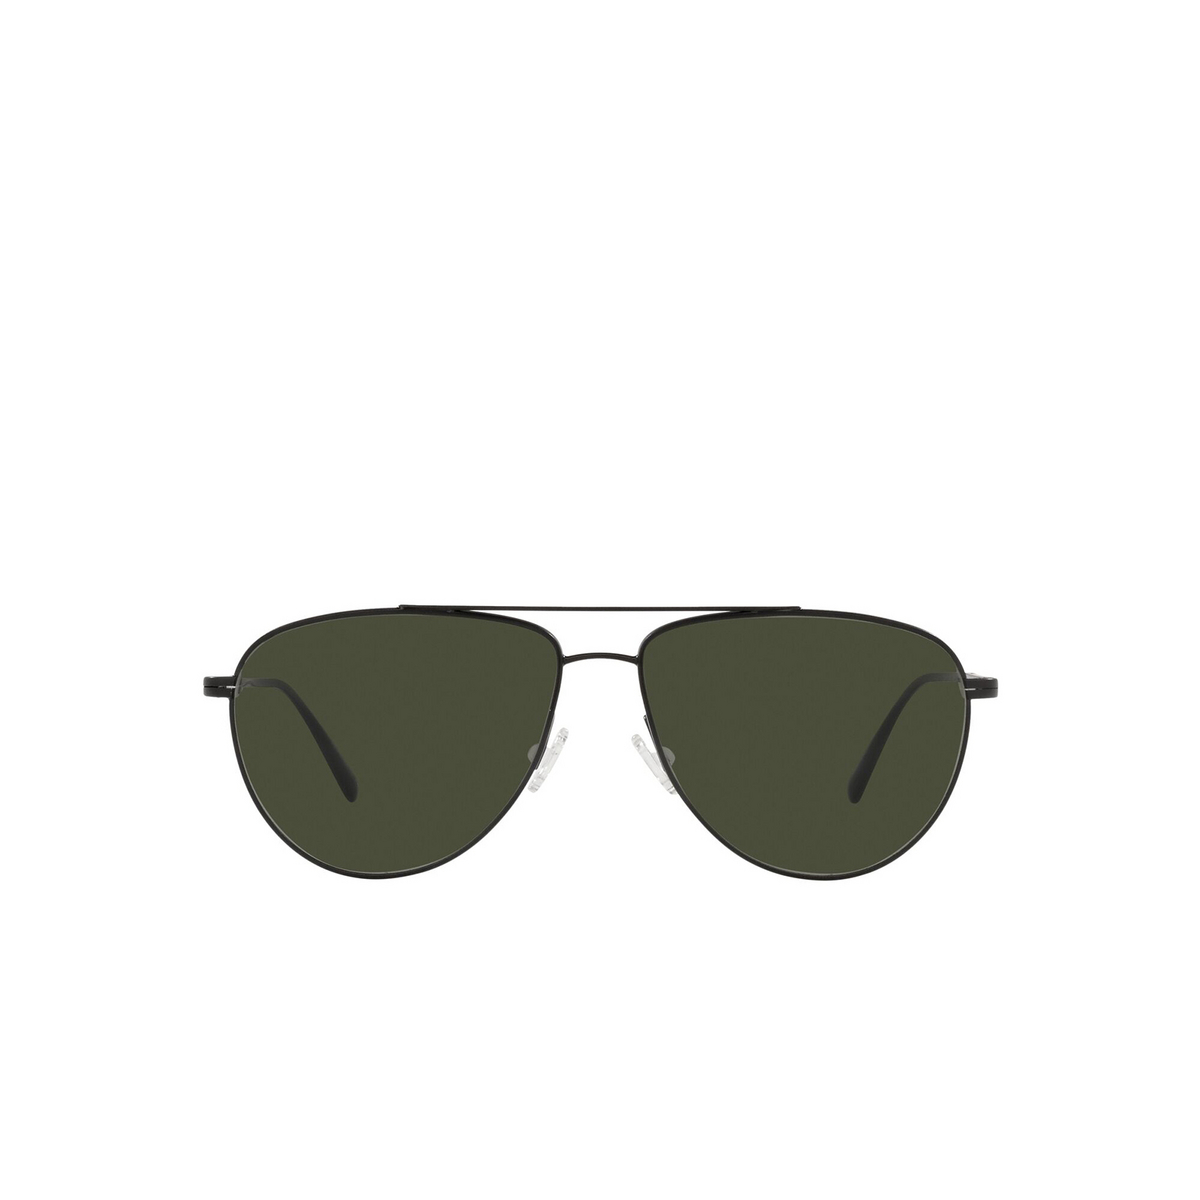 Oliver Peoples DISORIANO Sunglasses 506252 Matte Black - front view